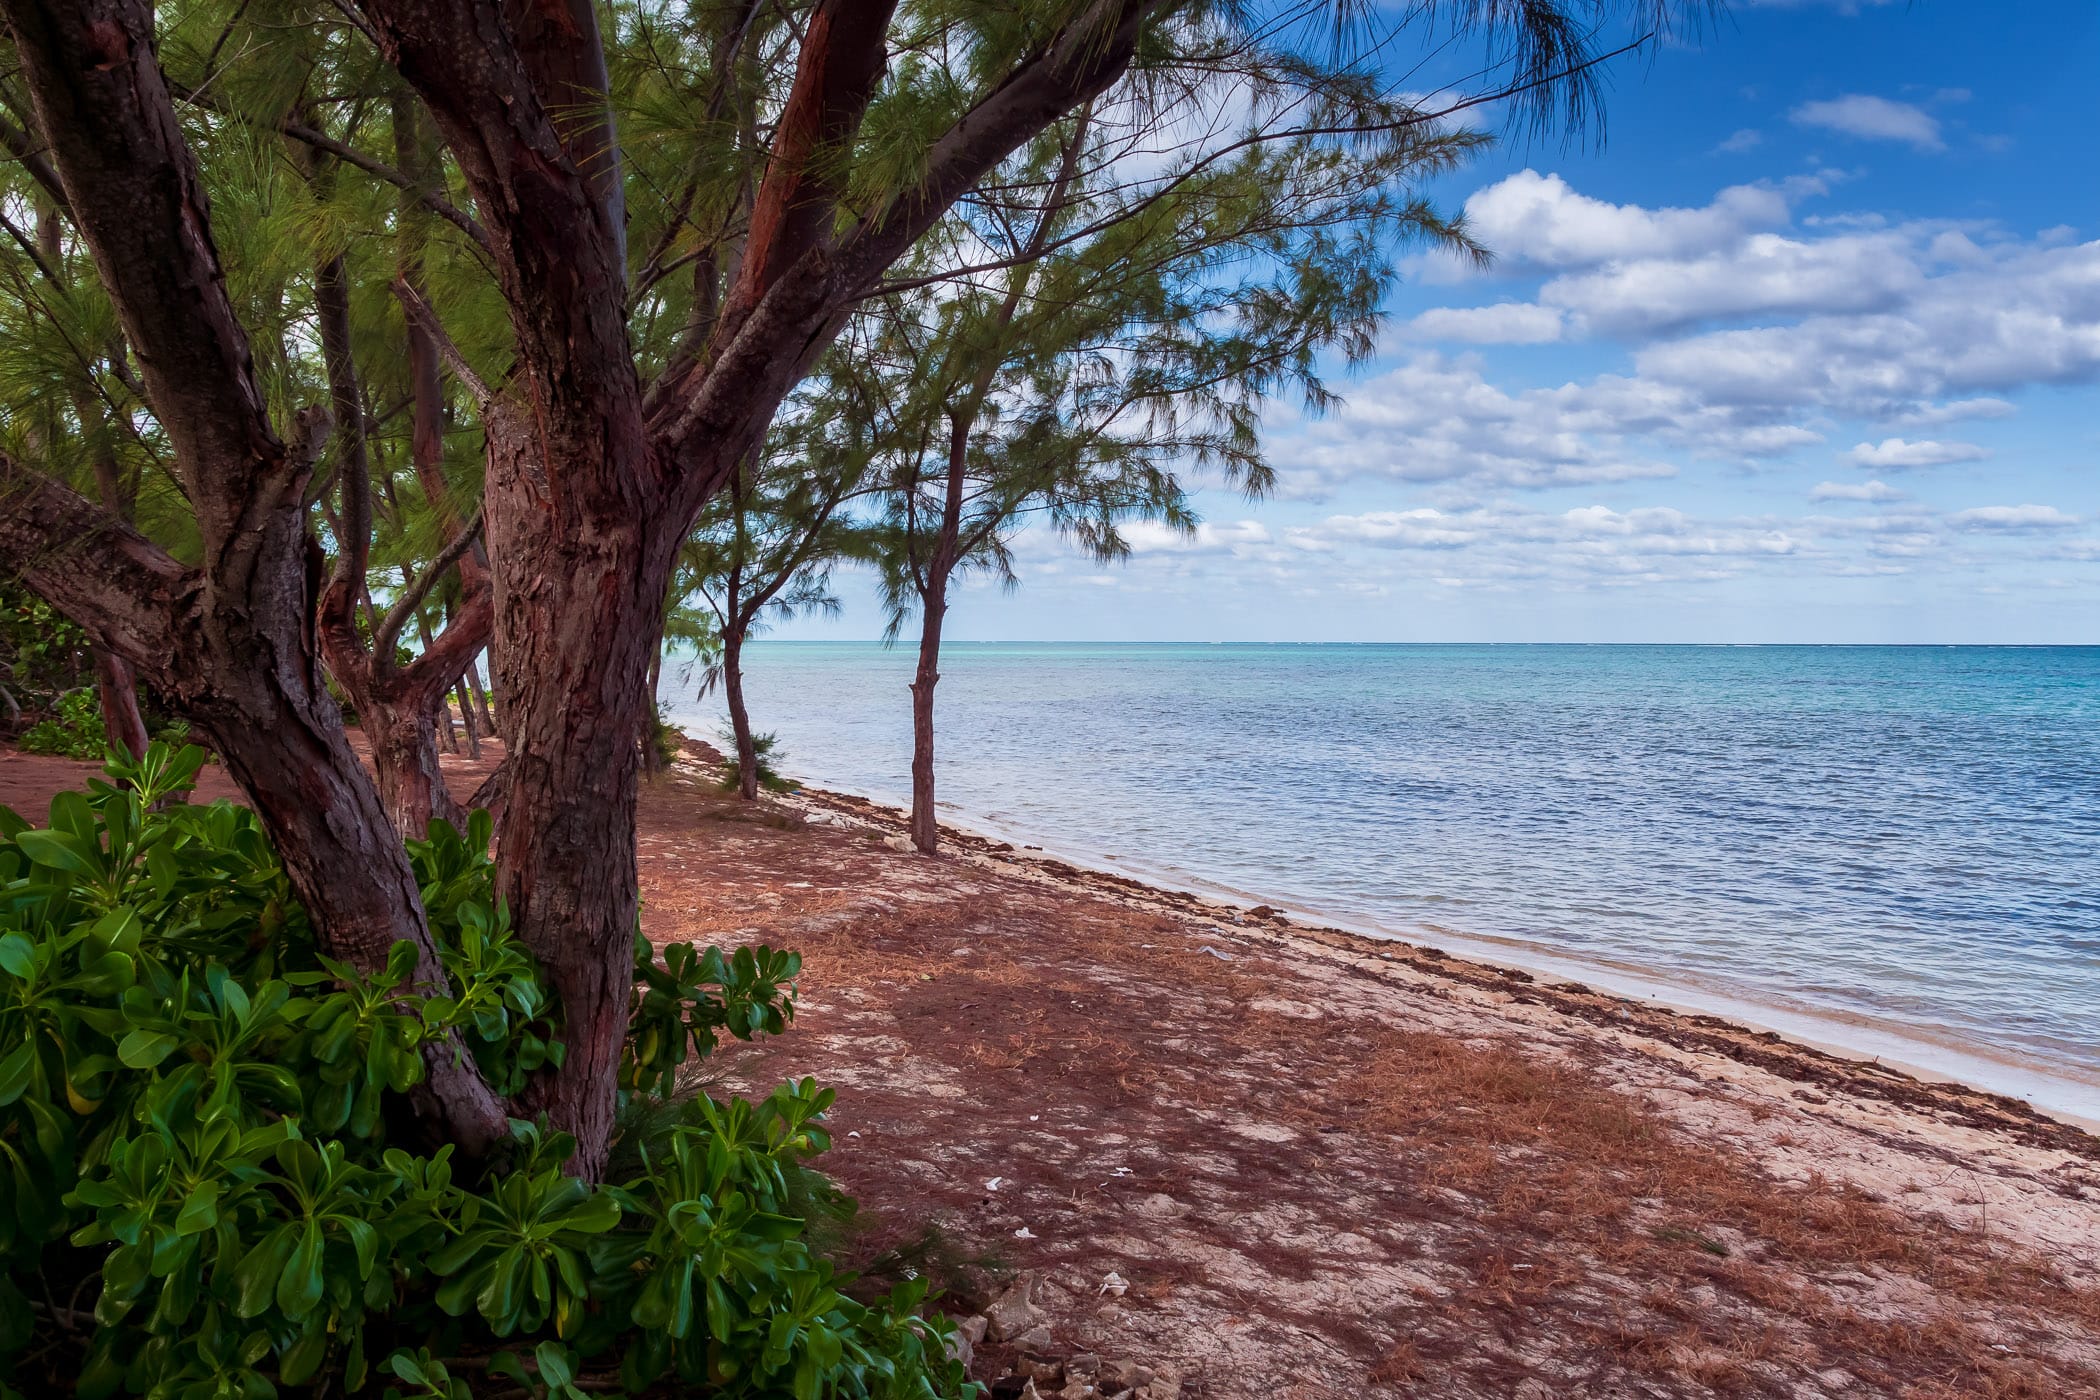 Trees grow on the beach at Barker's National Park, Grand Cayman.